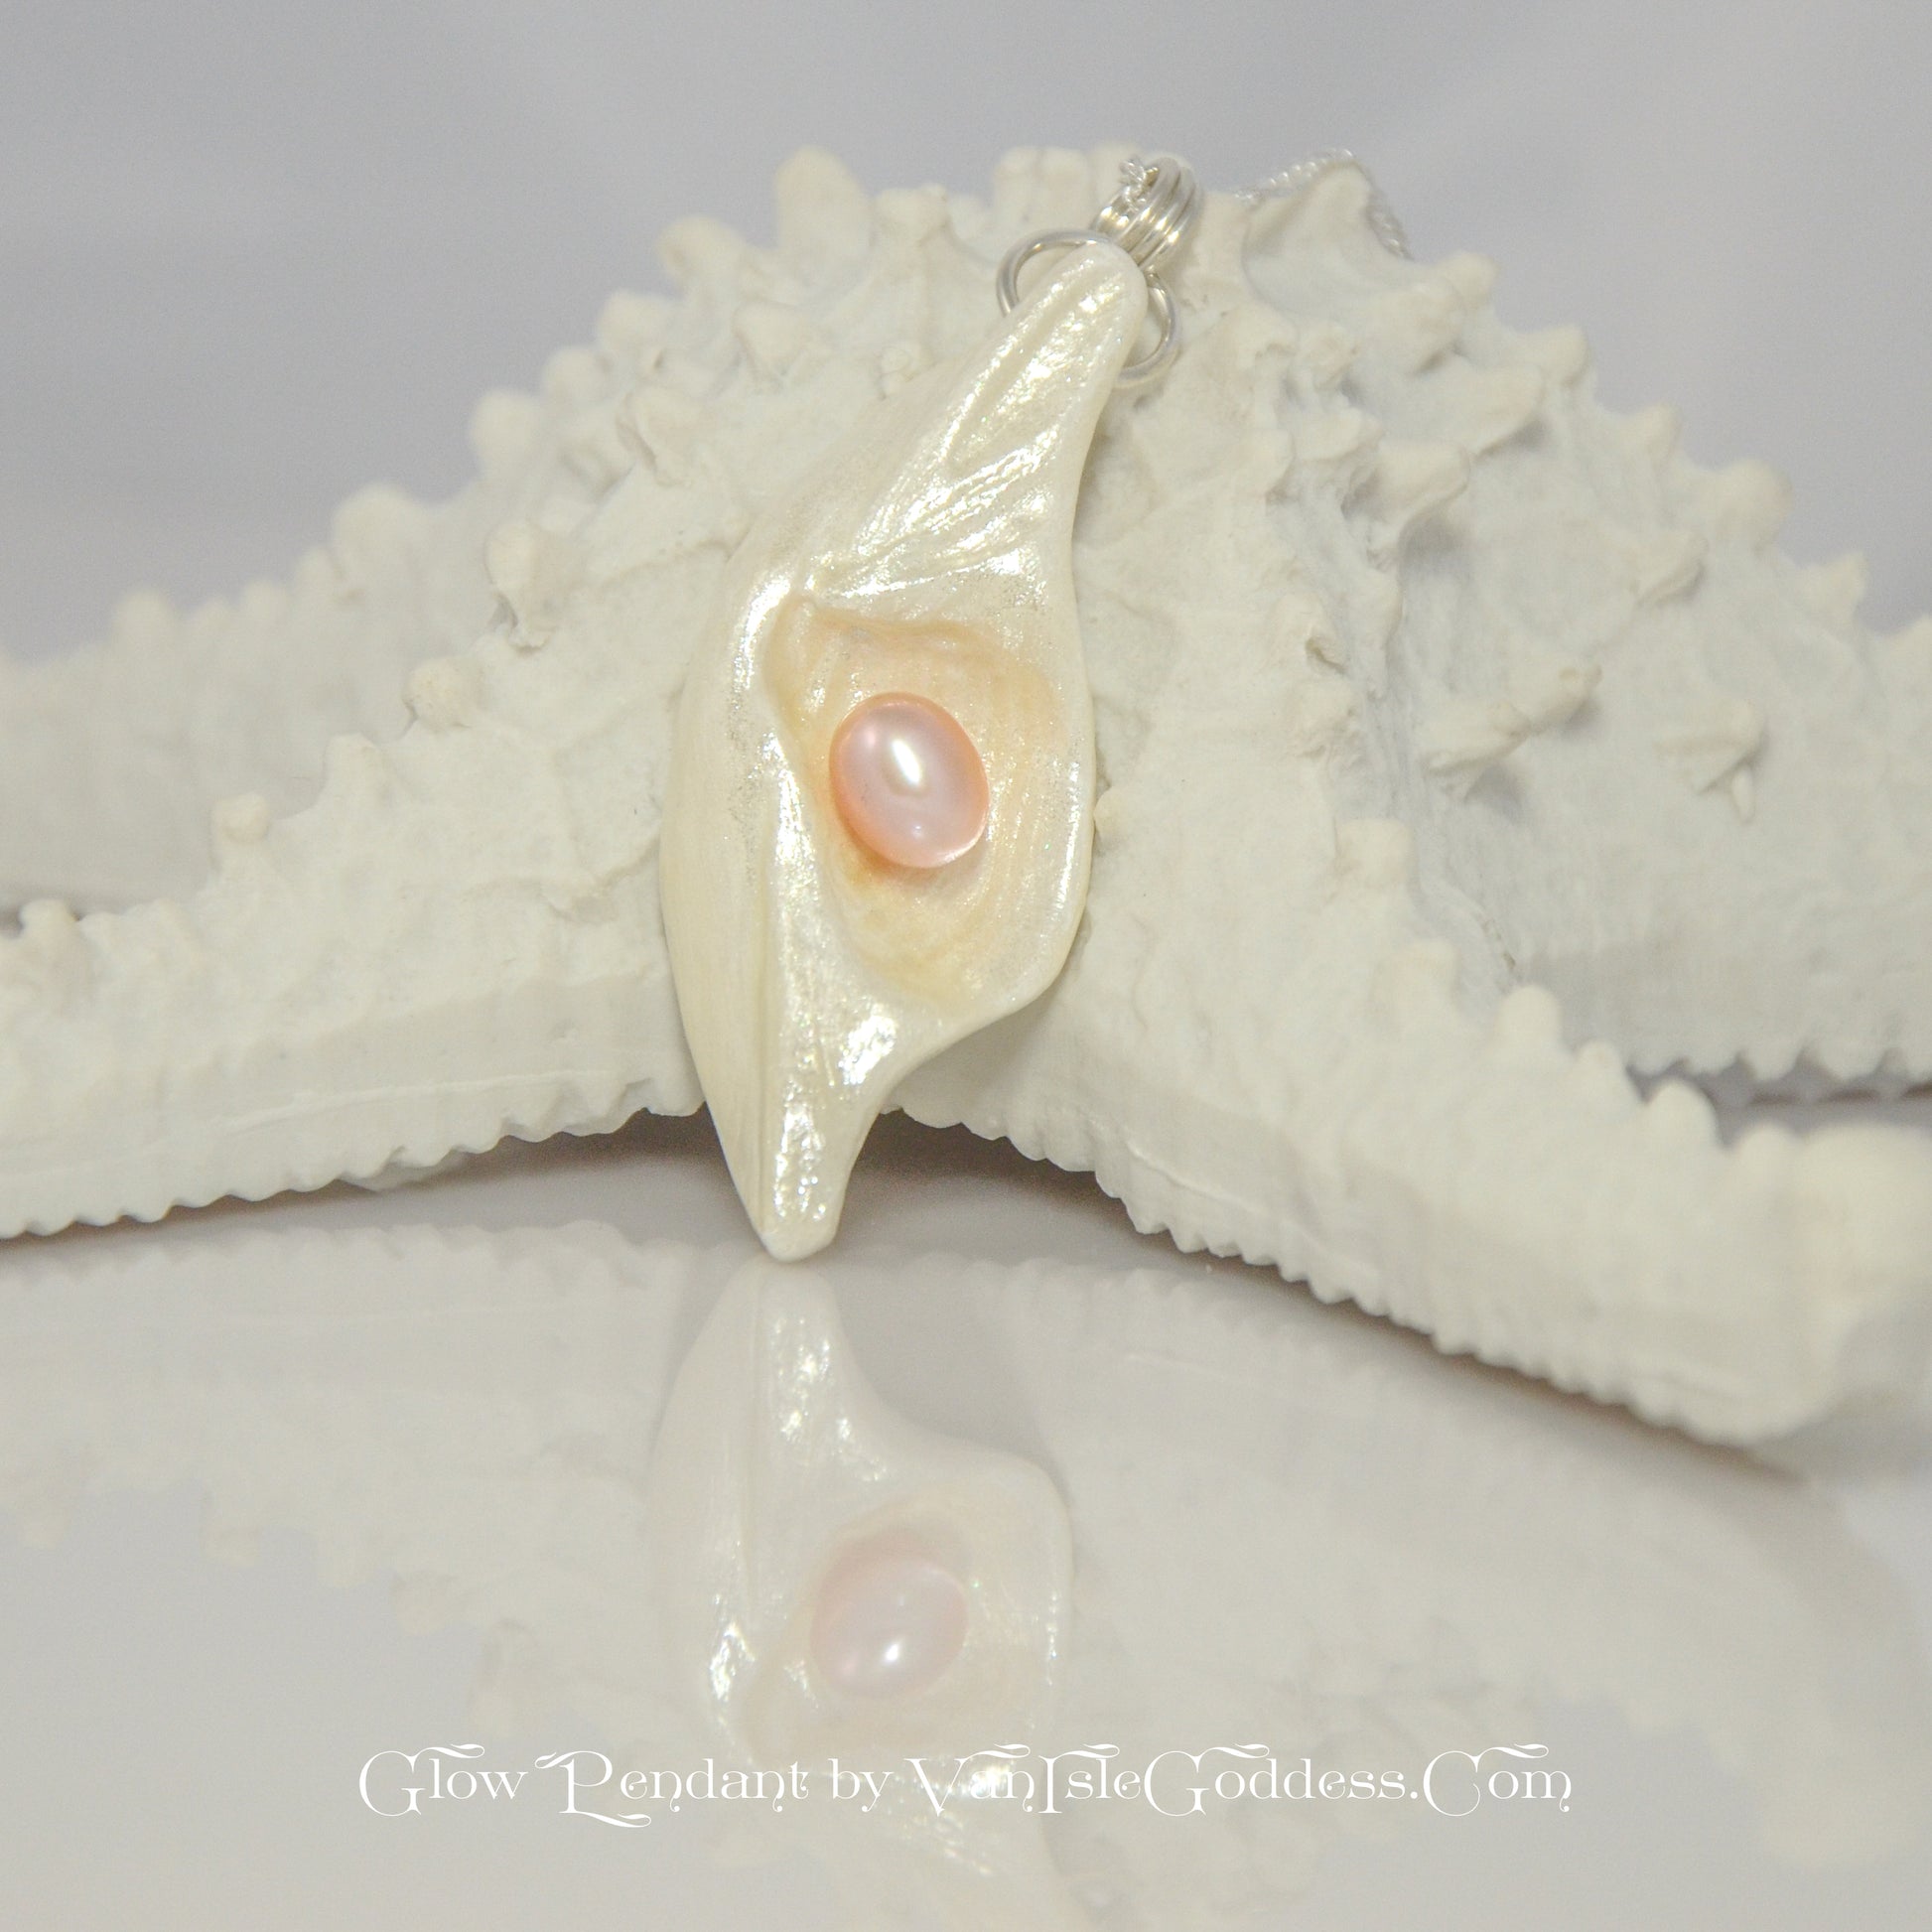 Glow natural seashell pendant with a pink freshwater pearl. The pendant rests on a starfish.